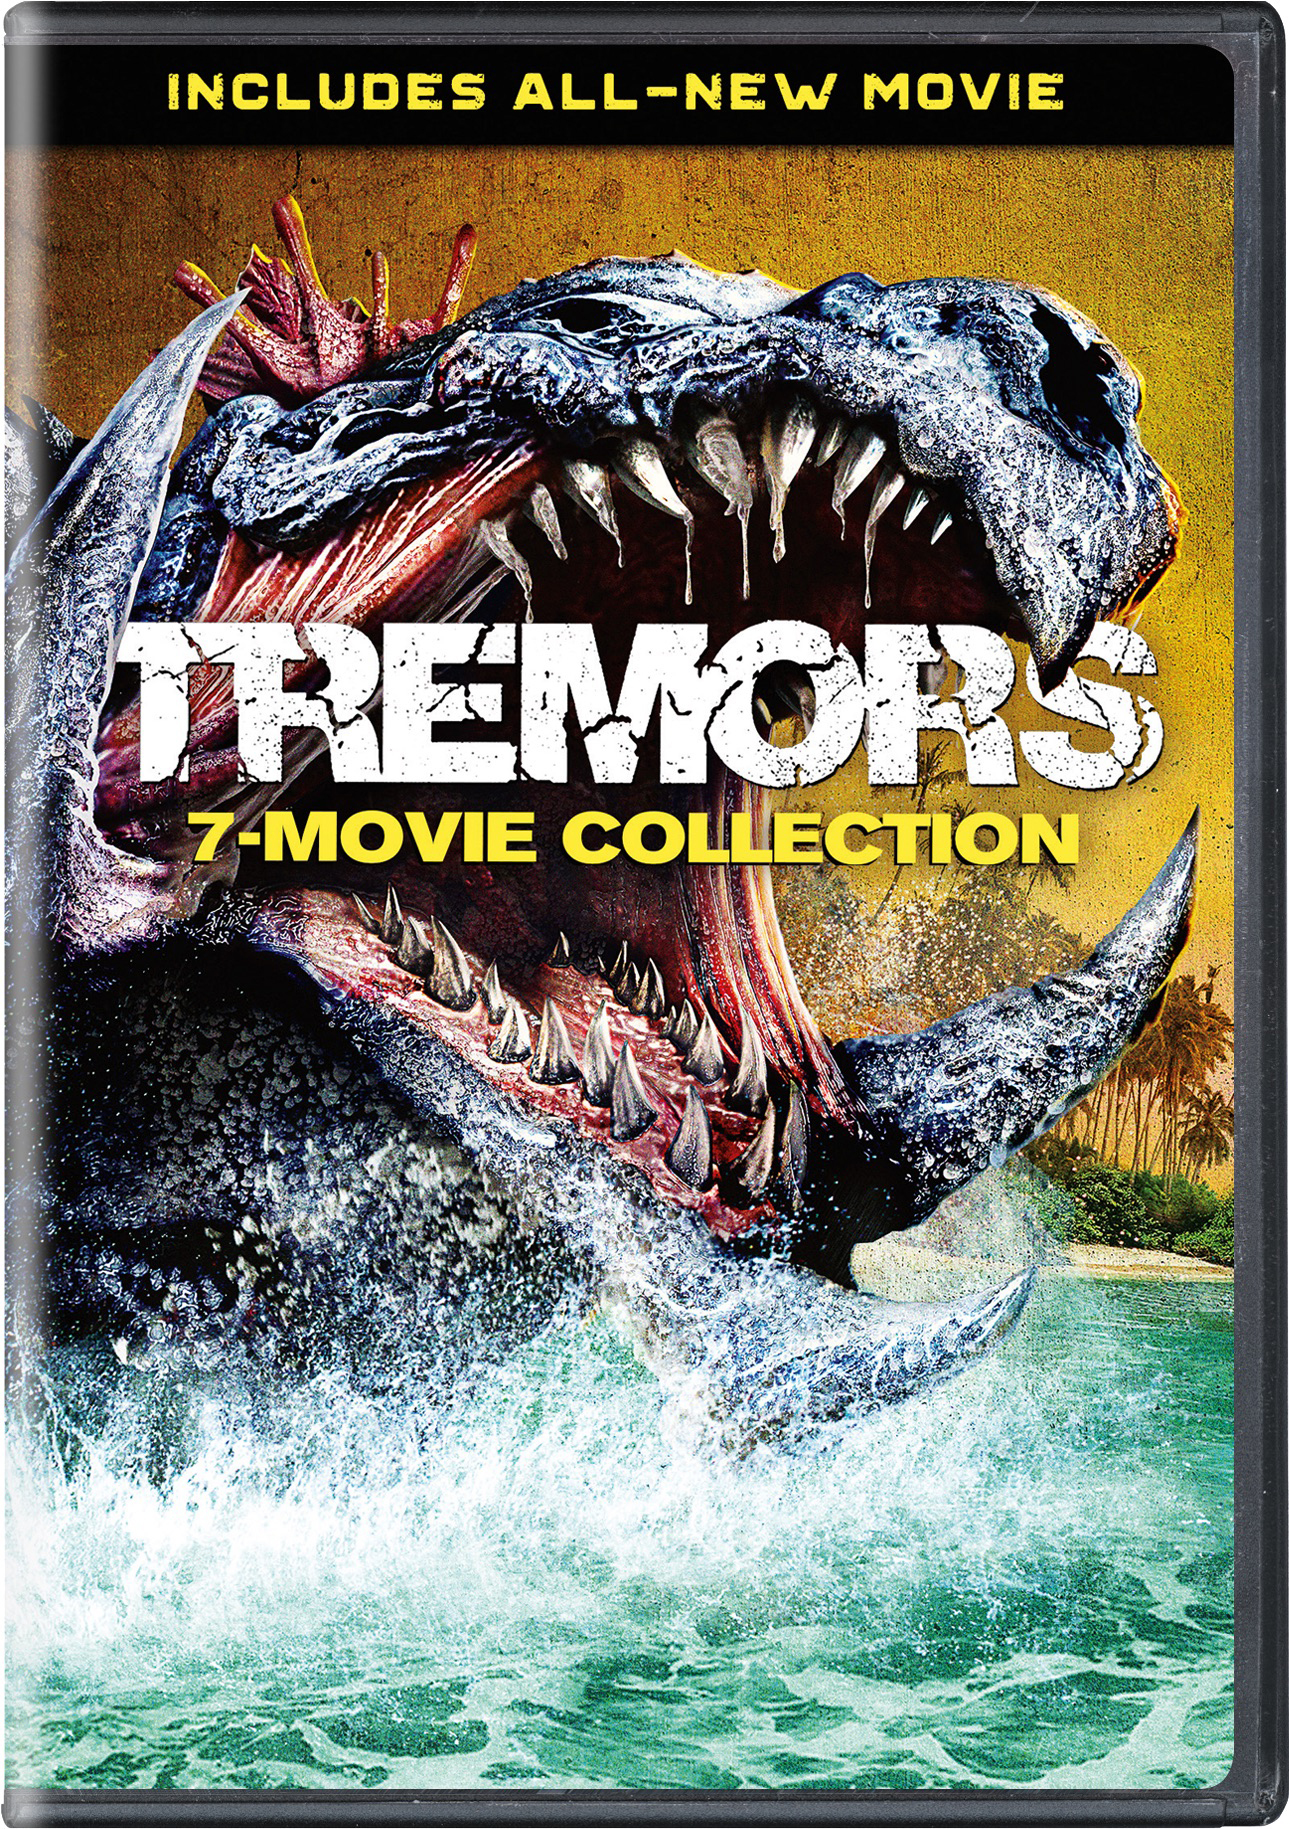 Tremors: 7-Movie Collection (DVD Set) - DVD [ 2020 ]  - Sci Fi Movies On DVD - Movies On GRUV